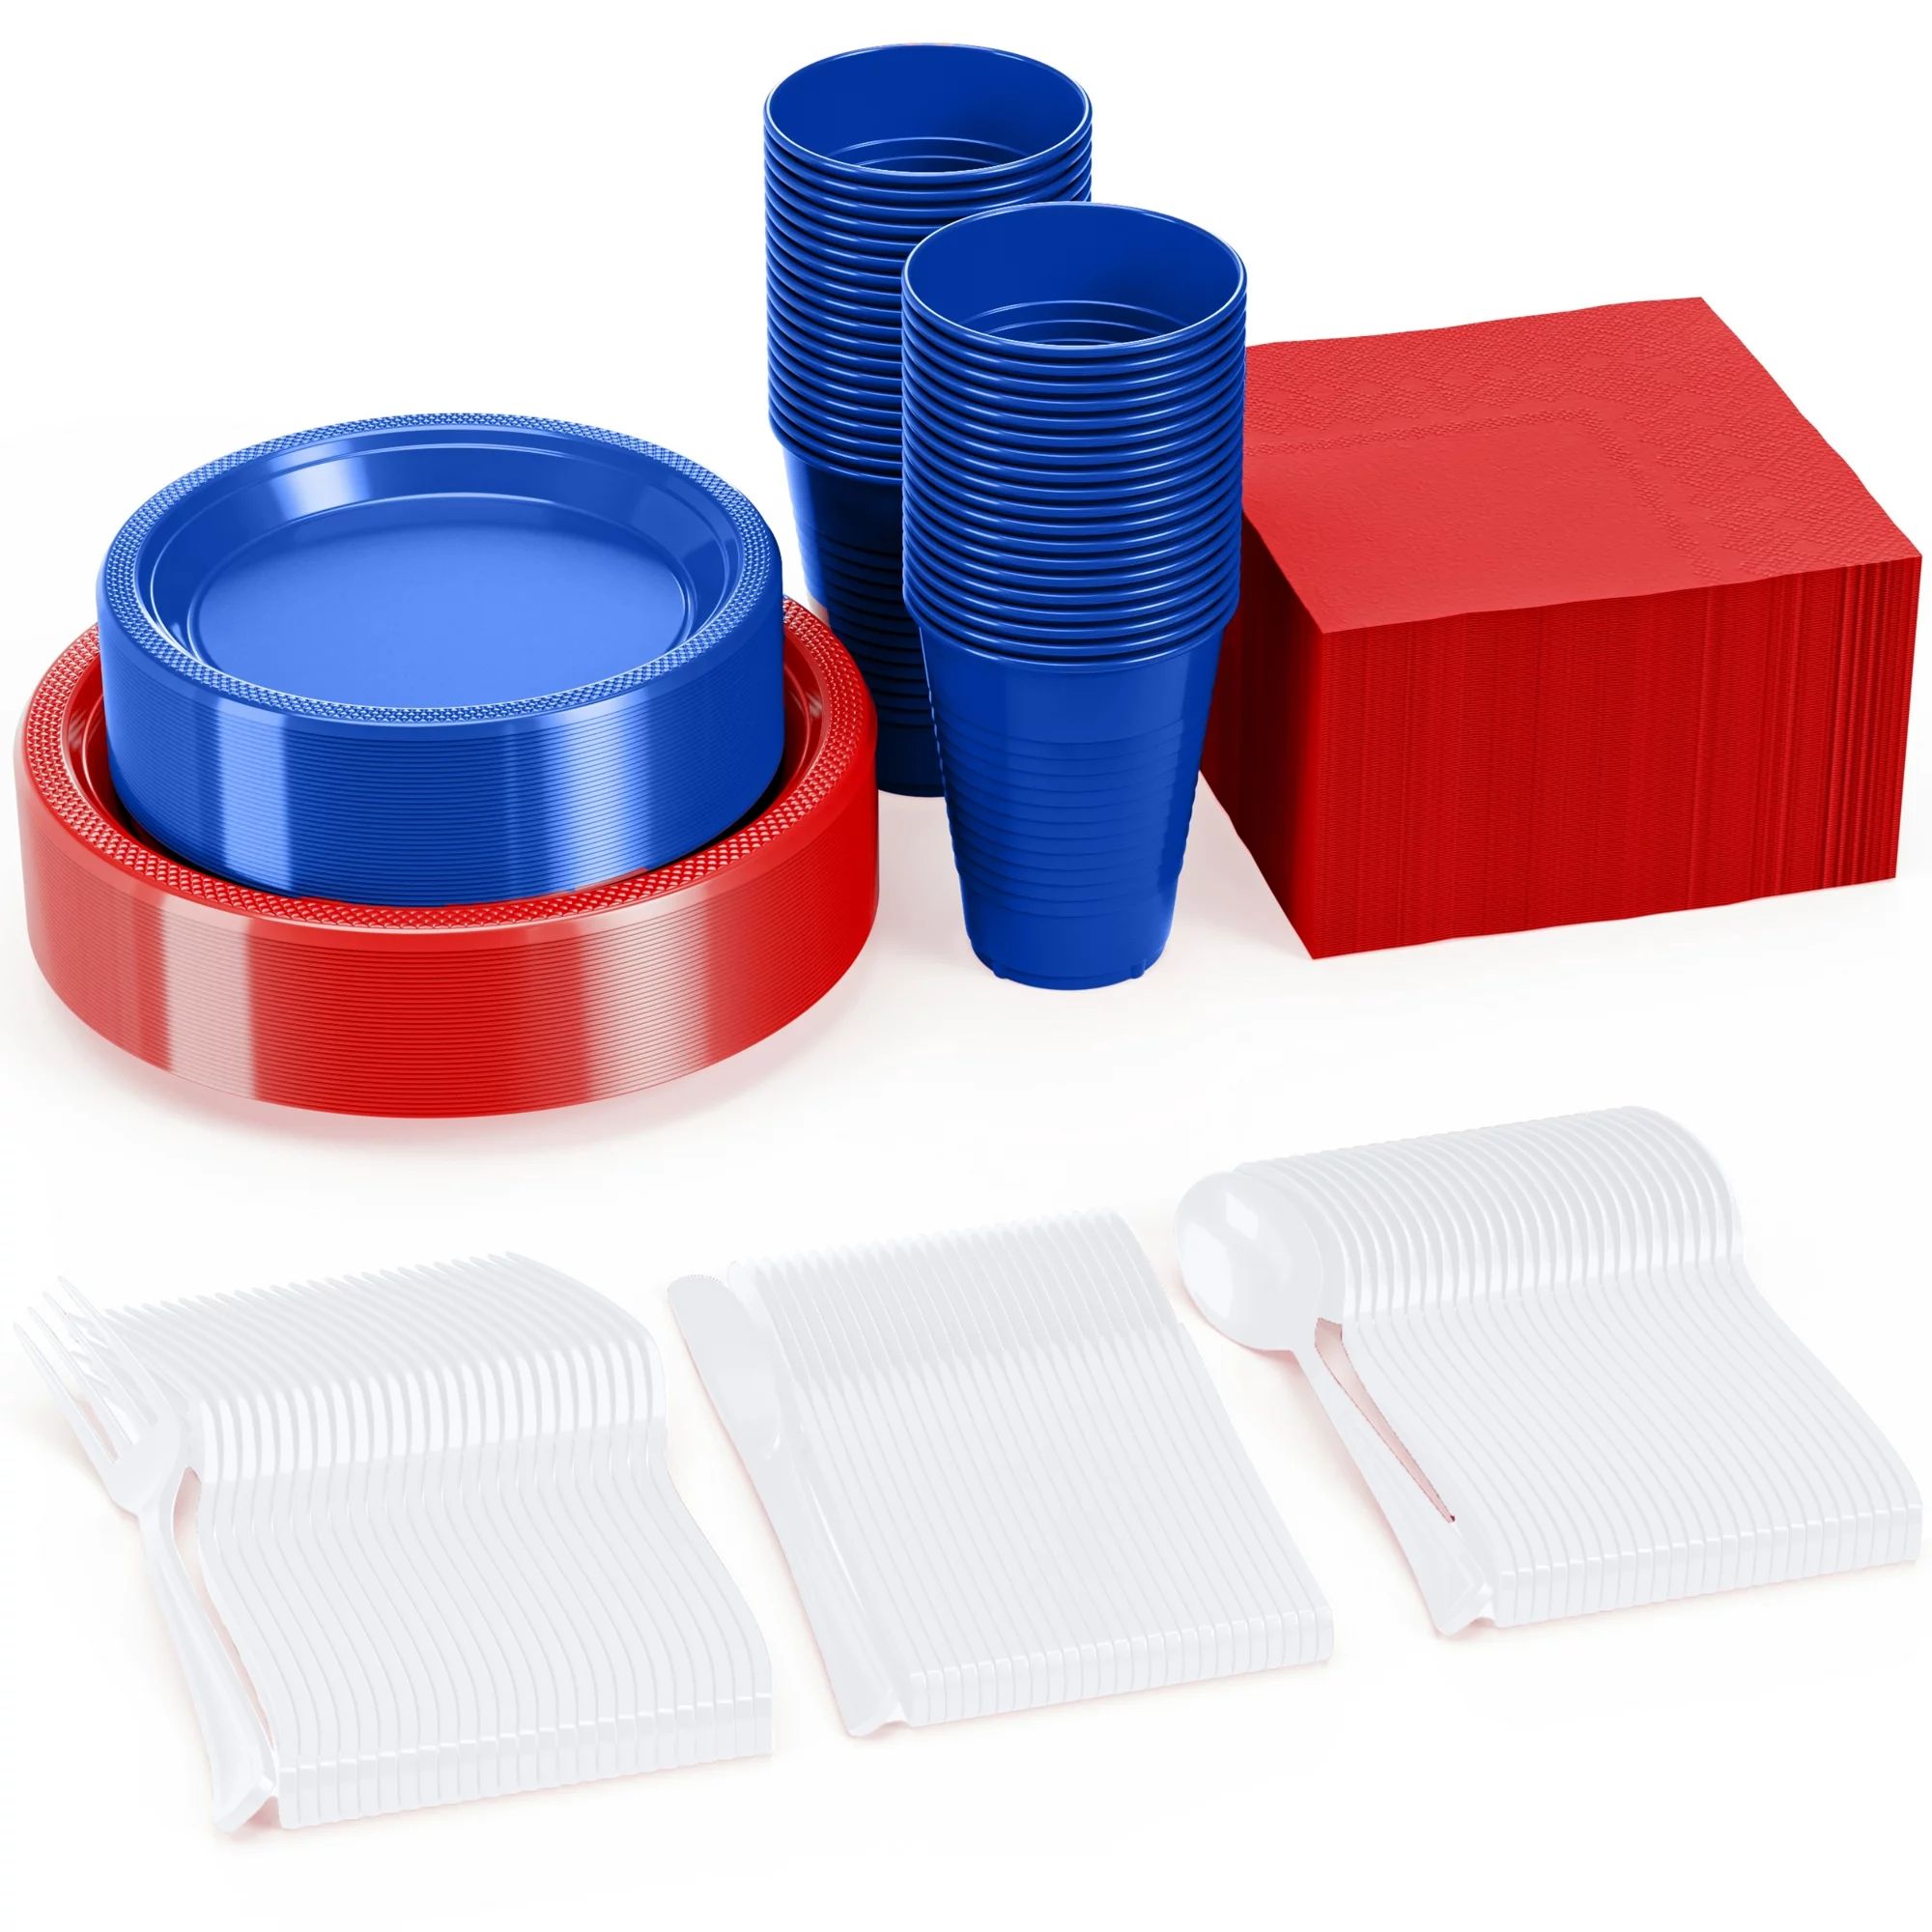 Exquisite 350-Piece Patriotic Plastic Plates & Cutlery Combo - Red, White, and Blue Disposable Pa... | Walmart (US)